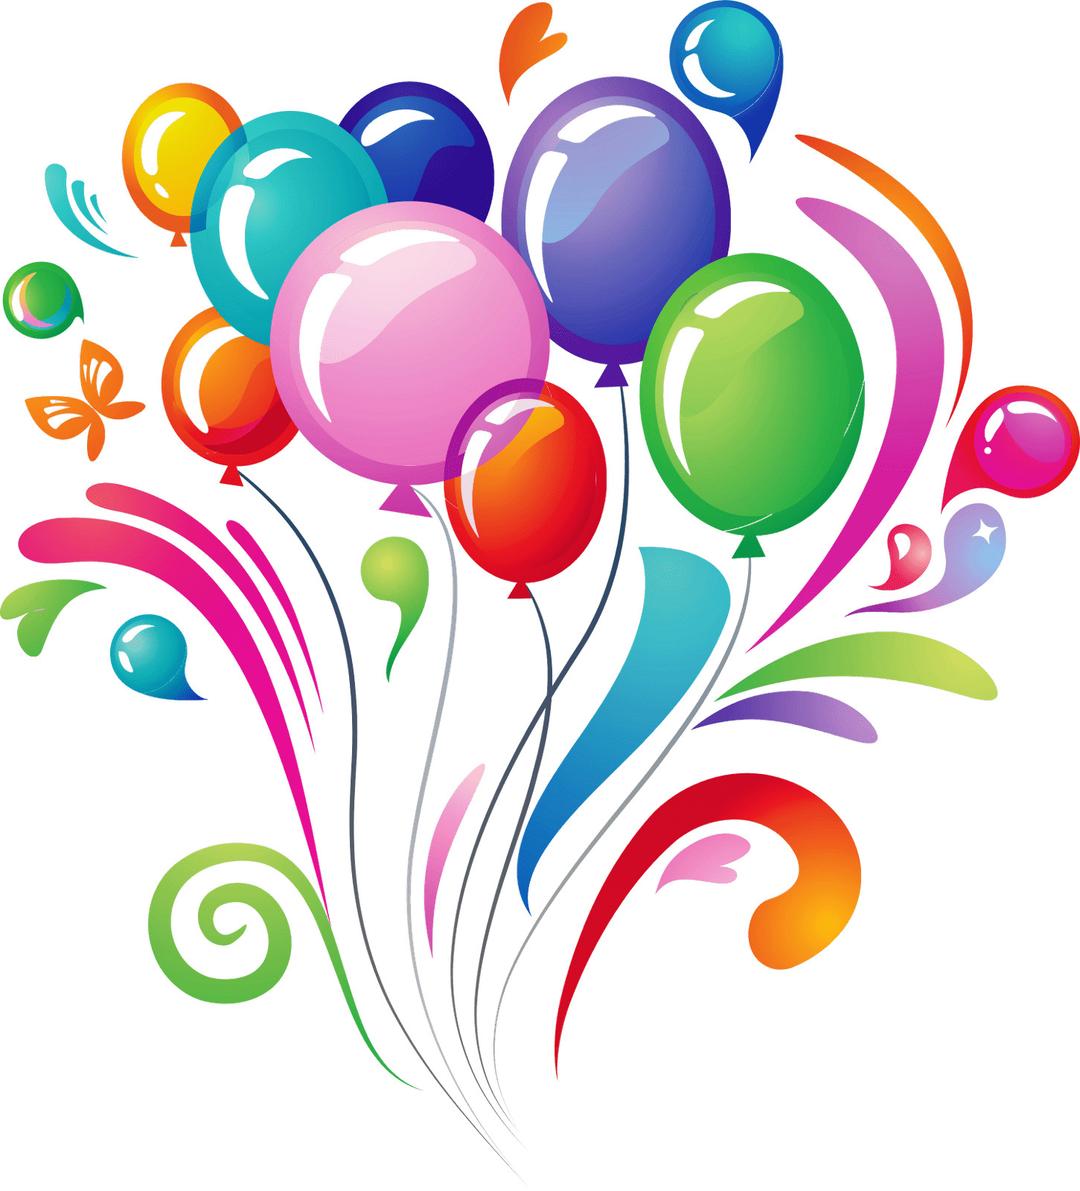 Balloons Explosion png transparent